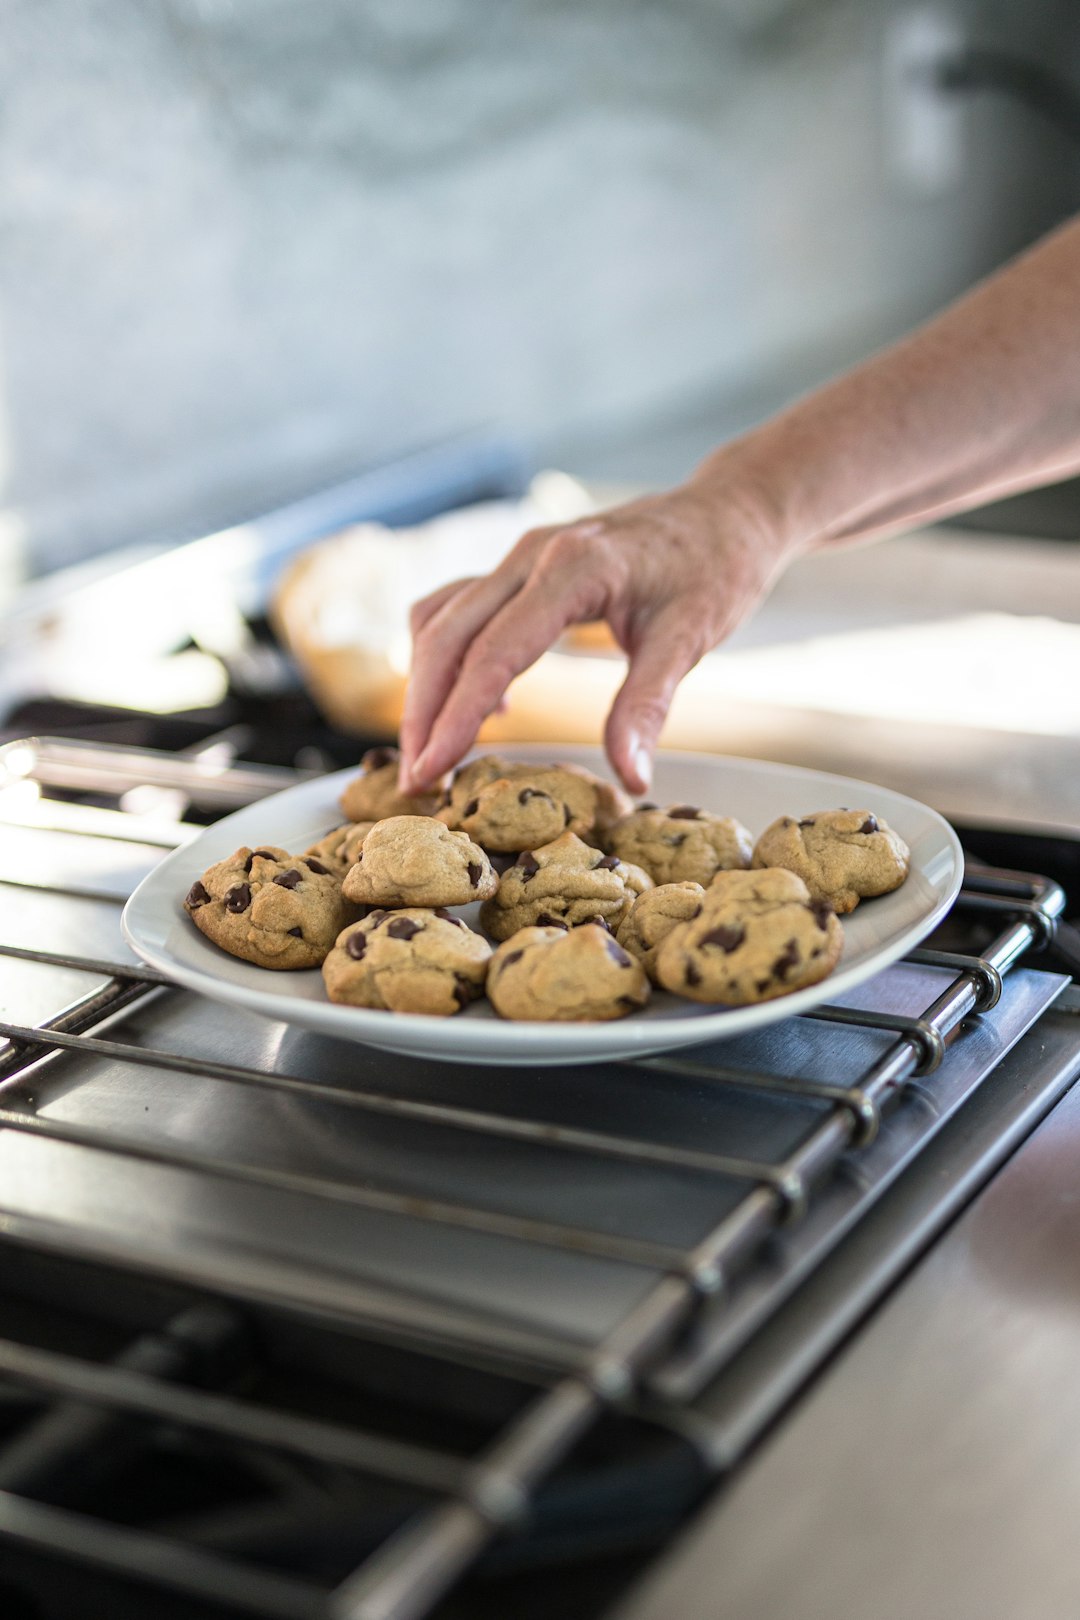 person holding brown cookies on stainless steel tray